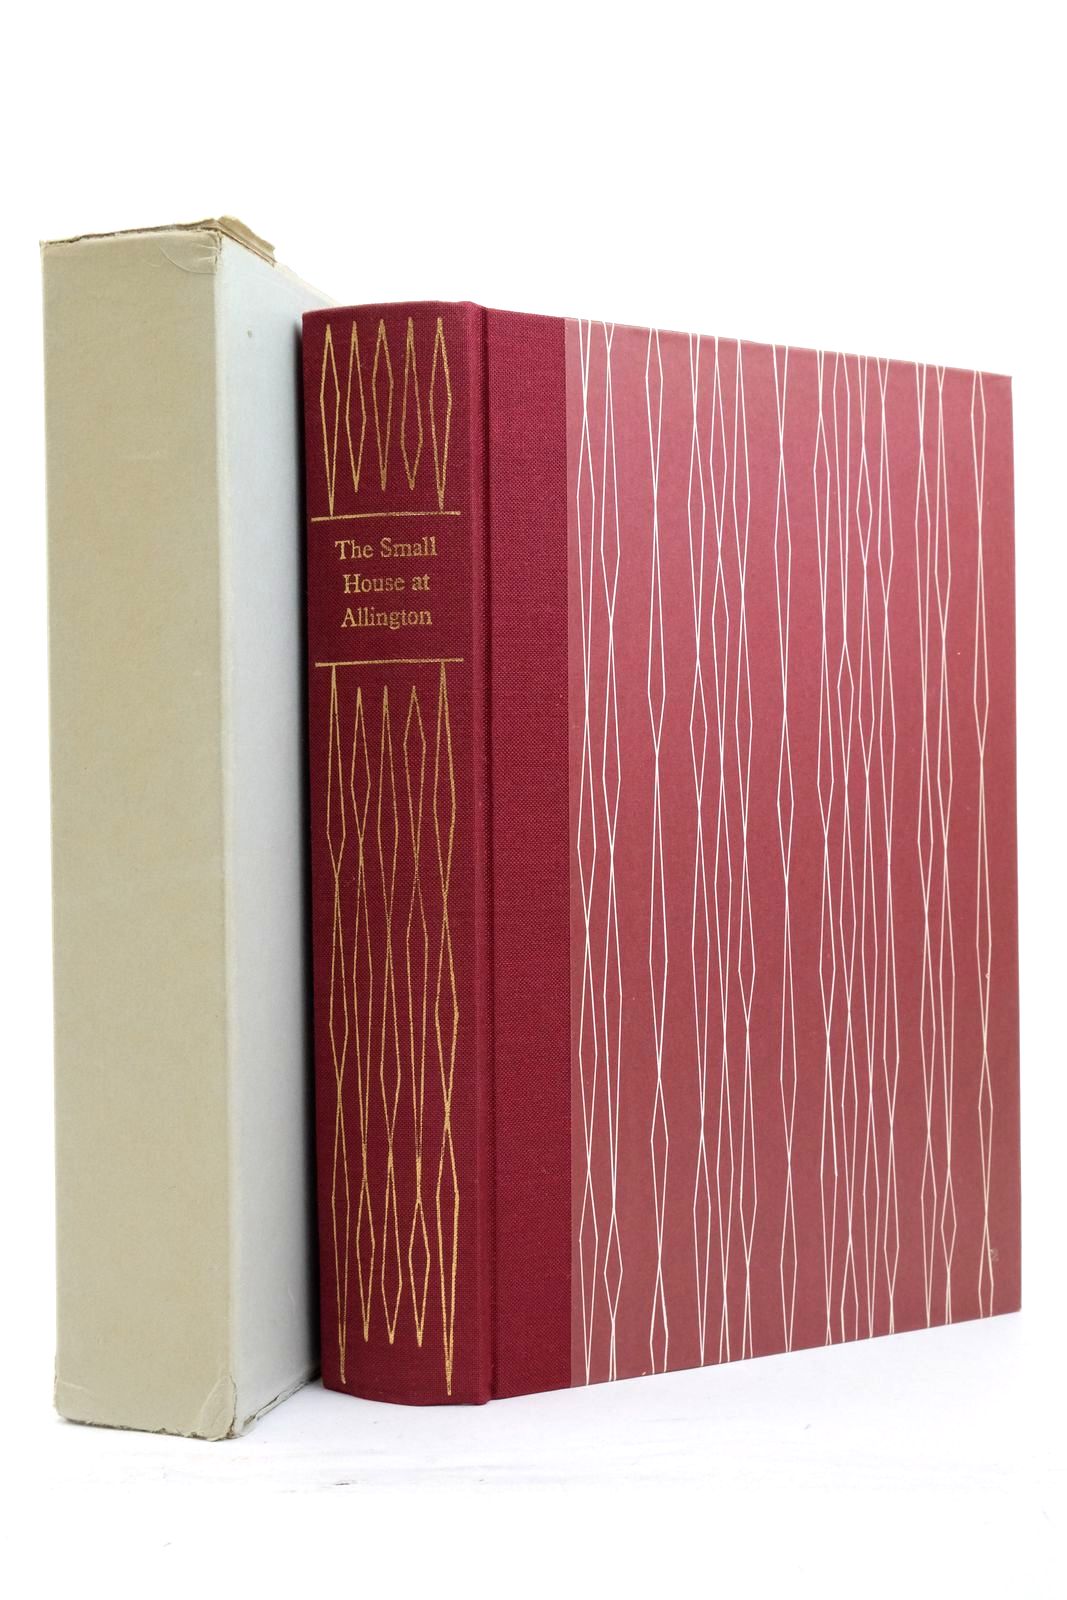 Photo of THE SMALL HOUSE AT ALLINGTON written by Trollope, Anthony illustrated by Reddick, Peter published by Folio Society (STOCK CODE: 2138212)  for sale by Stella & Rose's Books